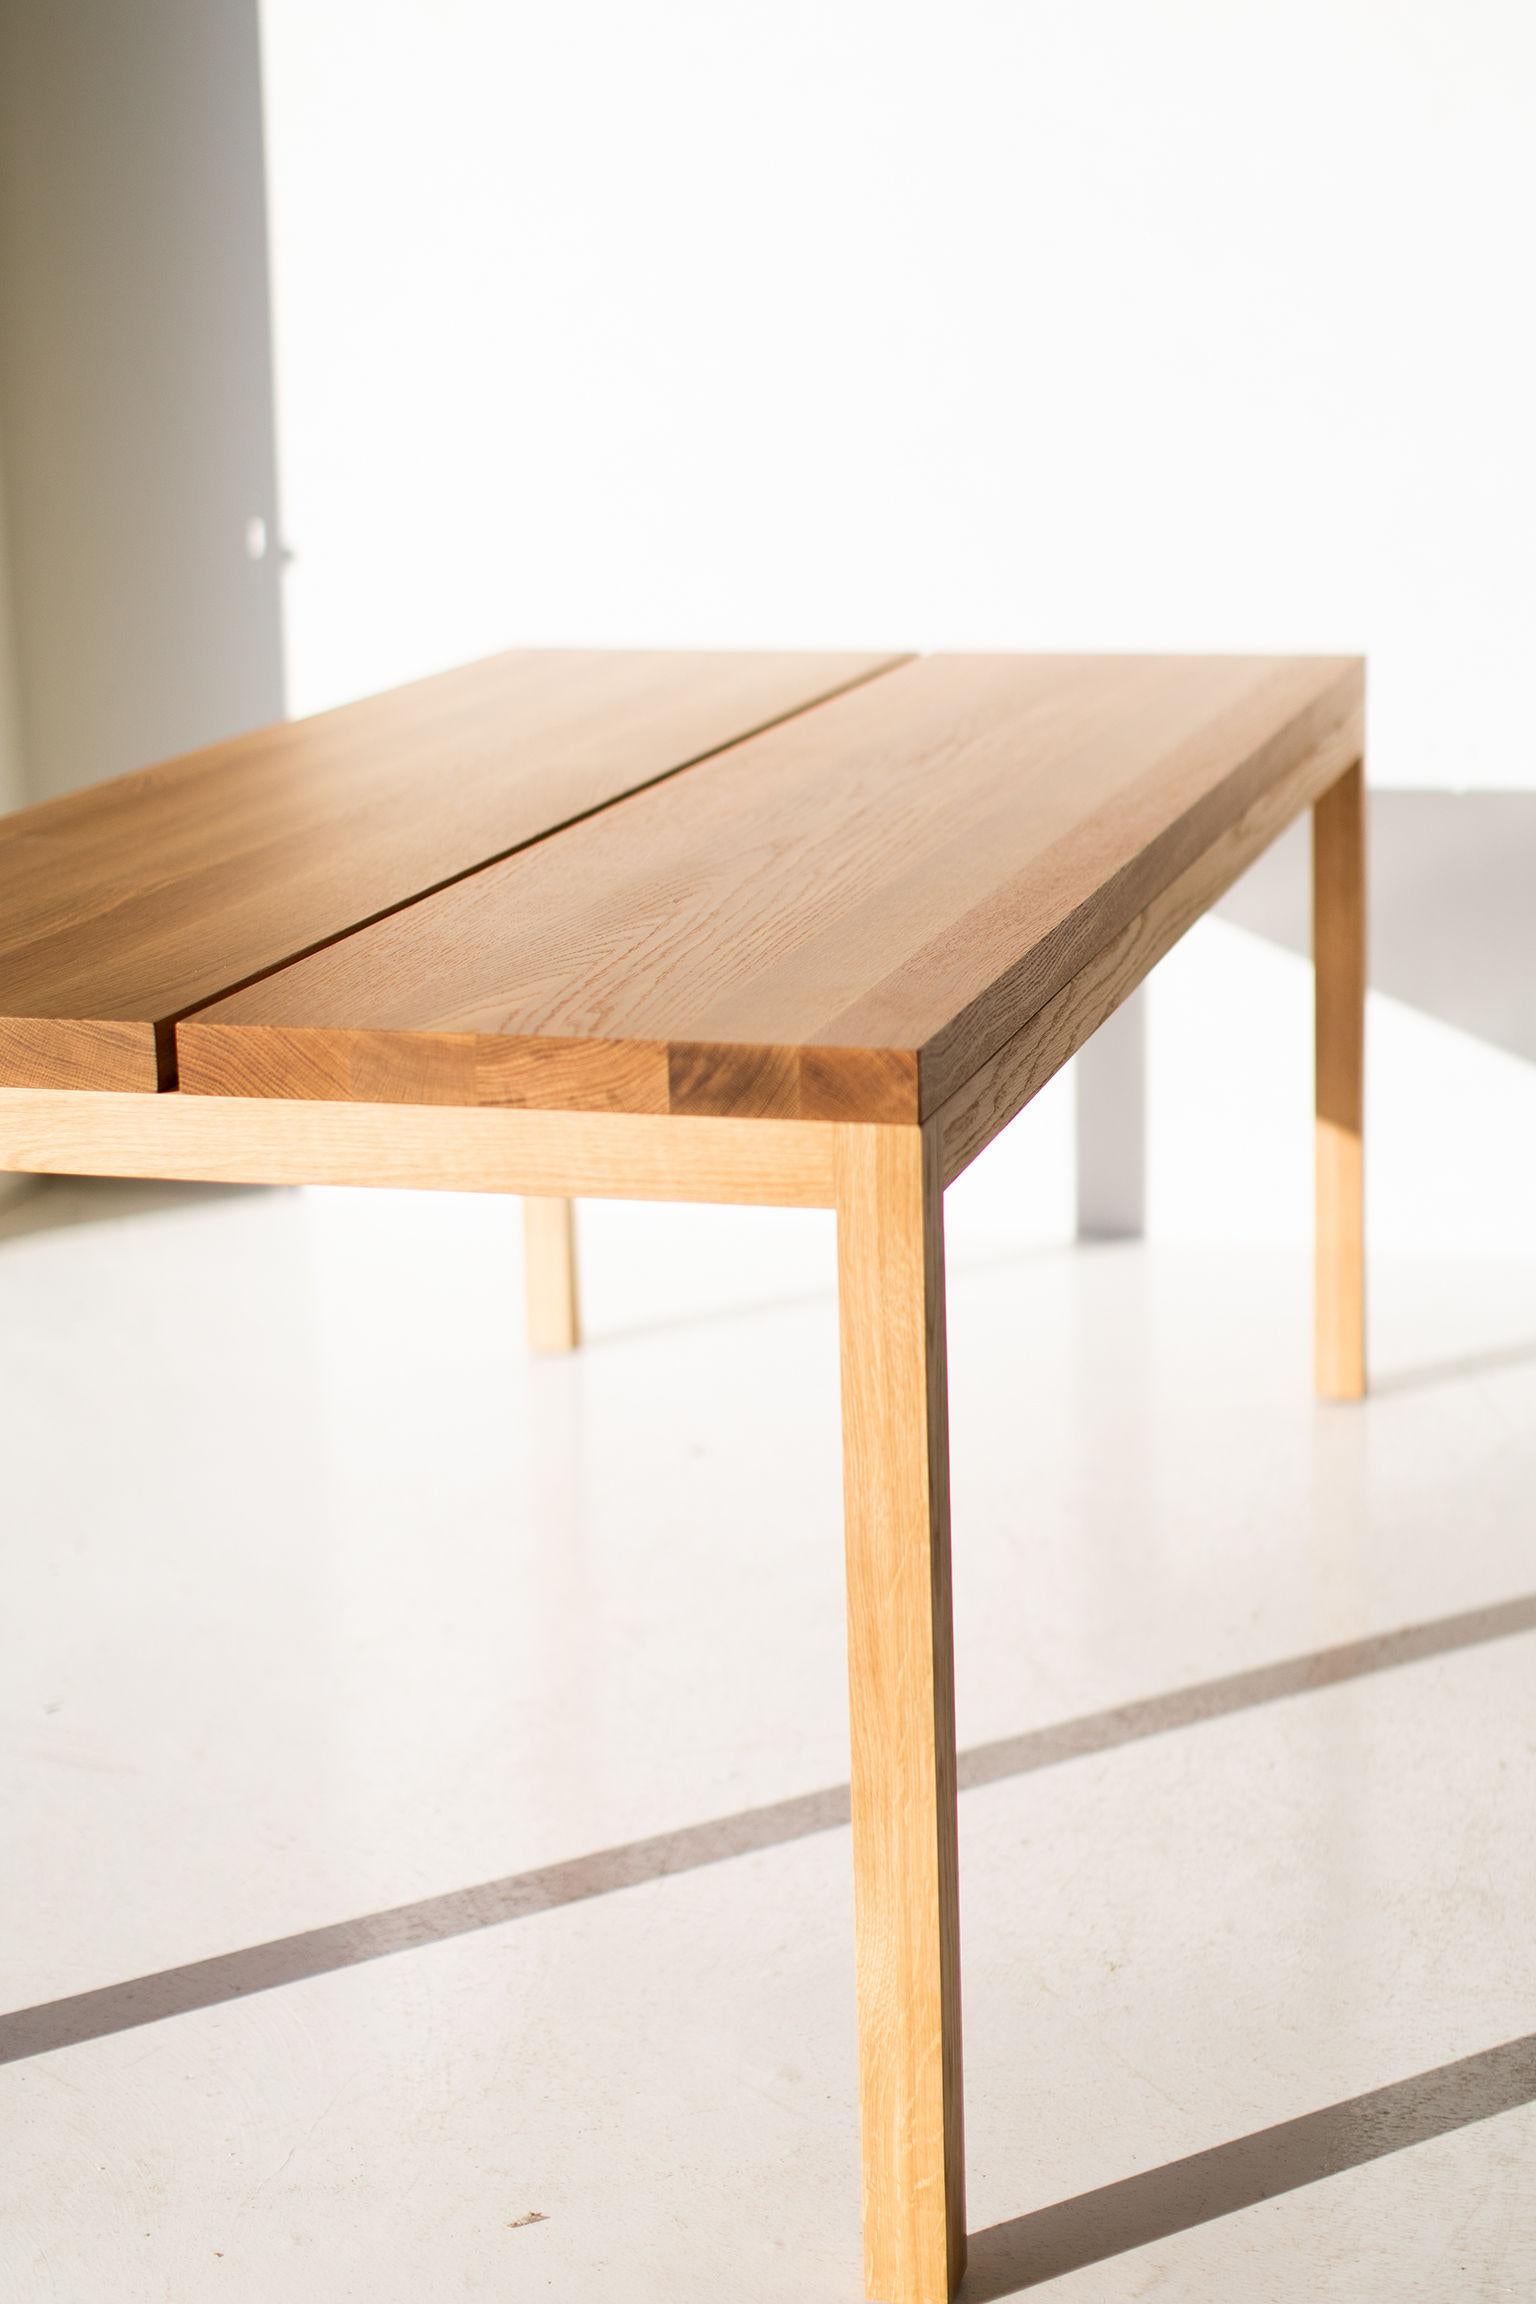 This modern white oak dining table is made in the heart of Ohio with locally sourced wood. We use this beautiful split panel table both as a modern dining table or desk. Each table is hand-made with solid white oak and finished with a beautiful